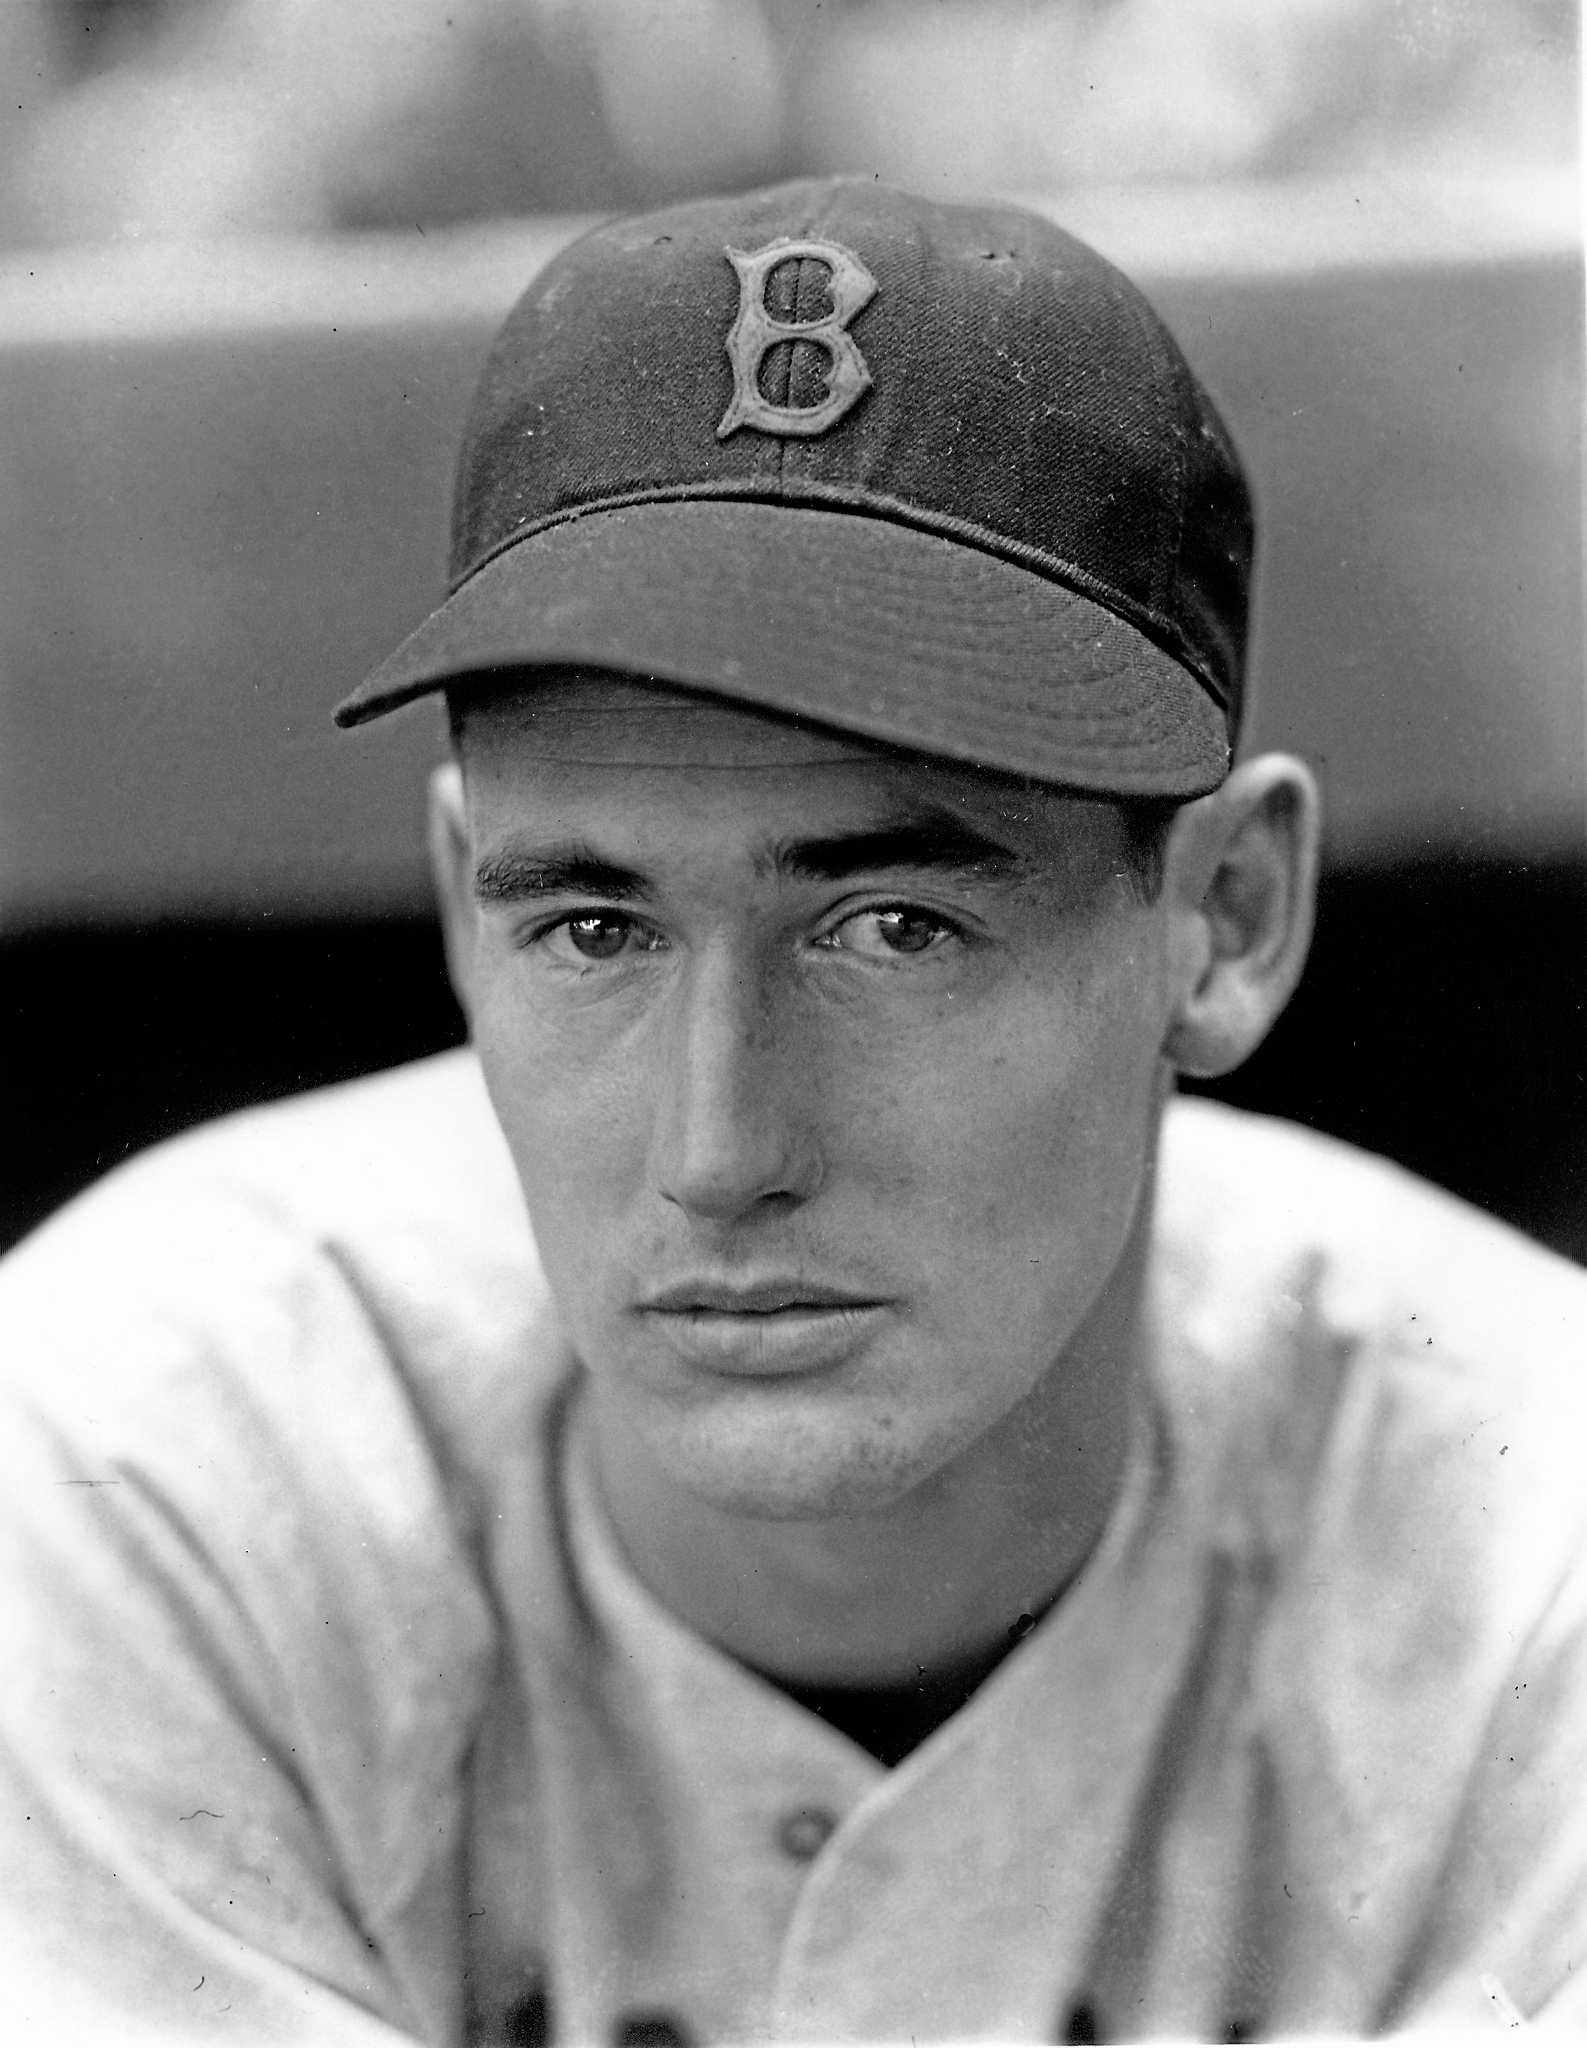 Startling details about Ted Williams's life unearthed - The Boston Globe